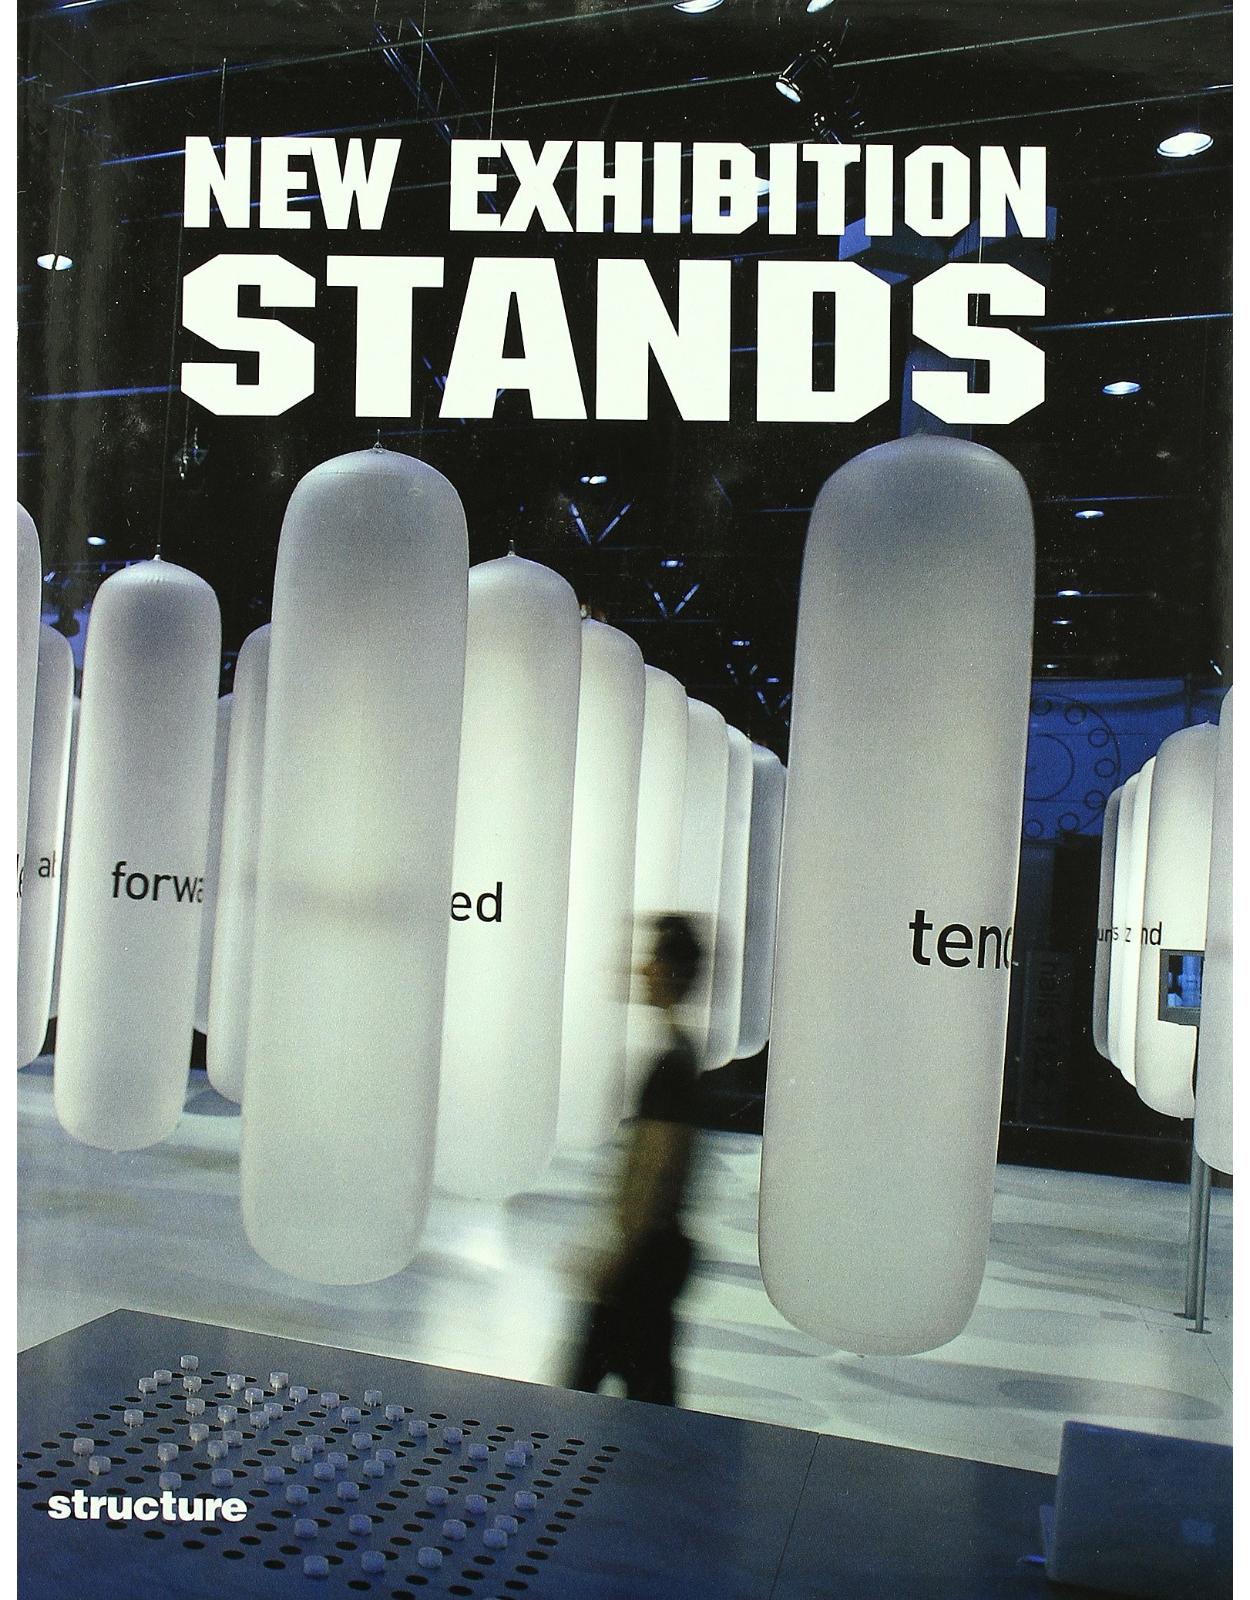 New Exhibition Stands